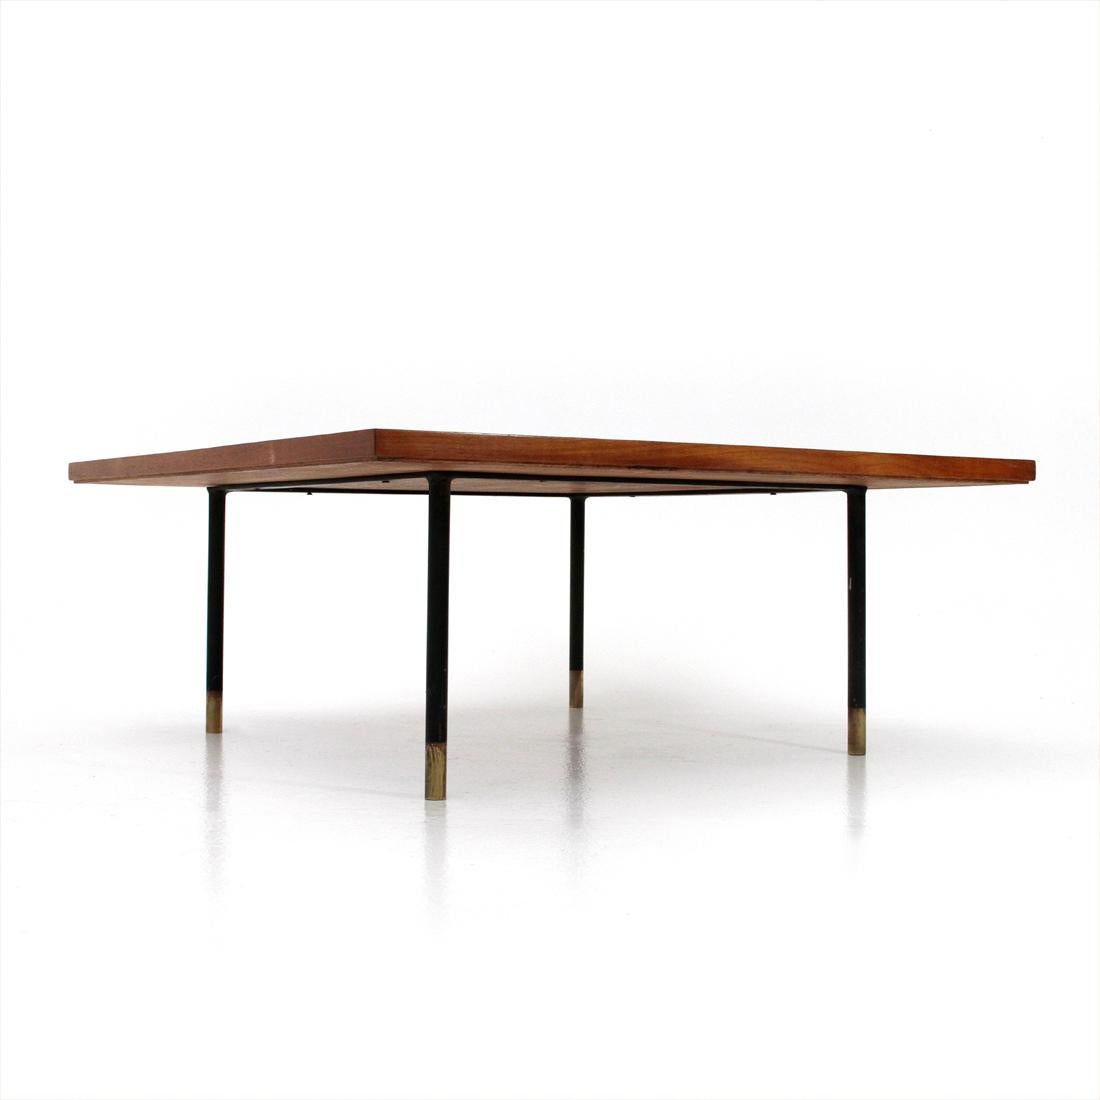 Italian manufacturing table produced in the 1950s.
Teak veneered wood top.
Black painted metal structure with brass feet.
Good general conditions, some signs due to normal use over time.

Dimensions: Width 80 cm, depth 80 cm, height 32 cm.